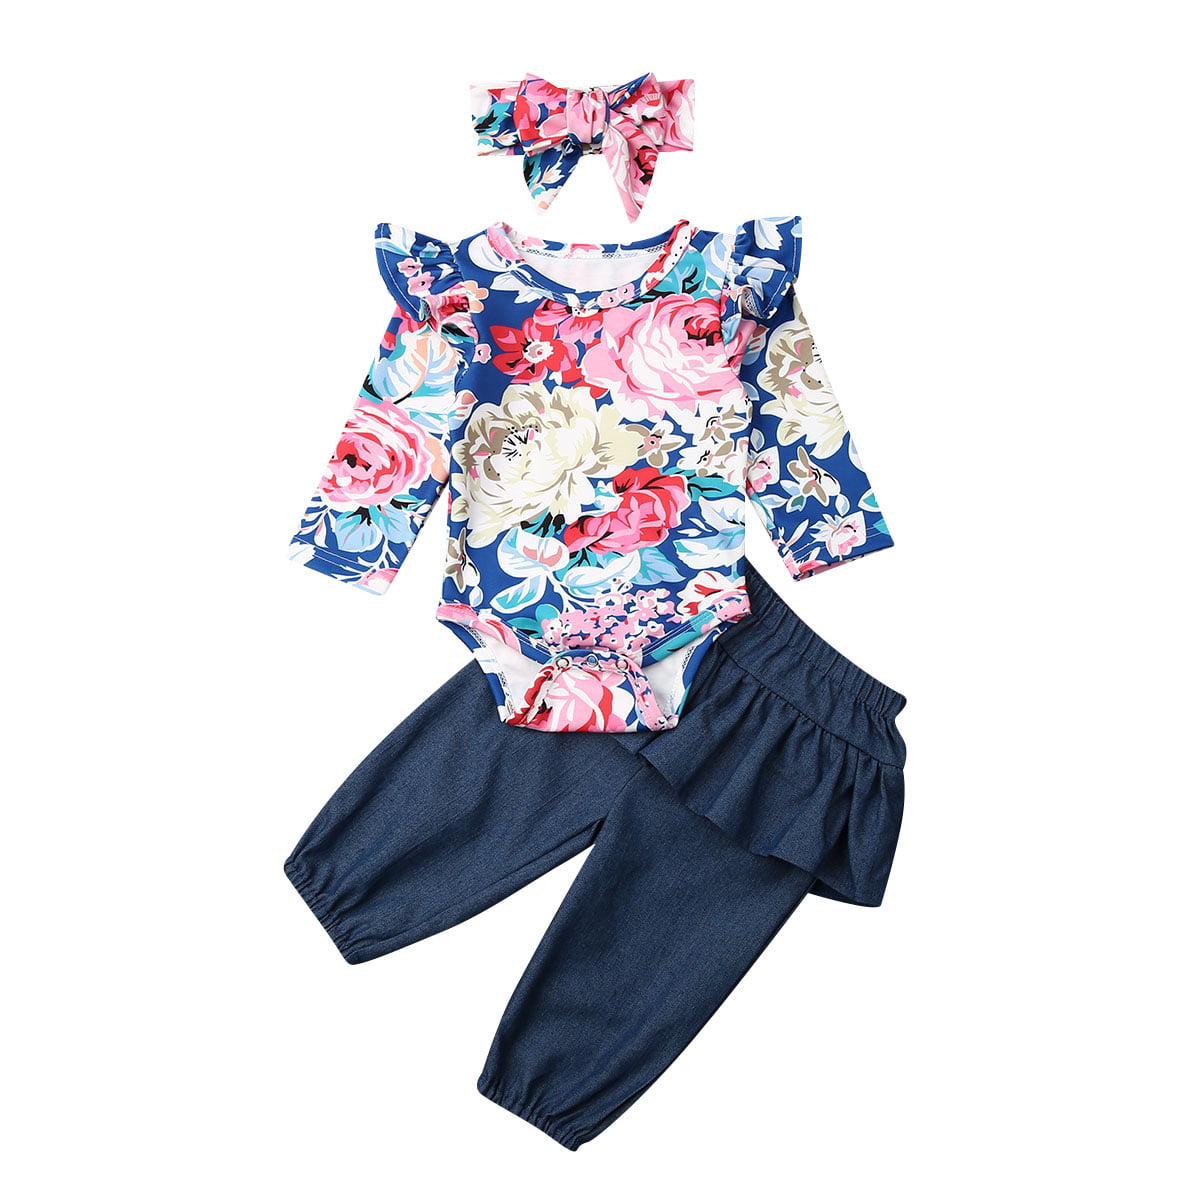 Baby's Romper Outfit Sets Jumpsuit Bodysuit  Floral Ruffle Pants Bow Headband 